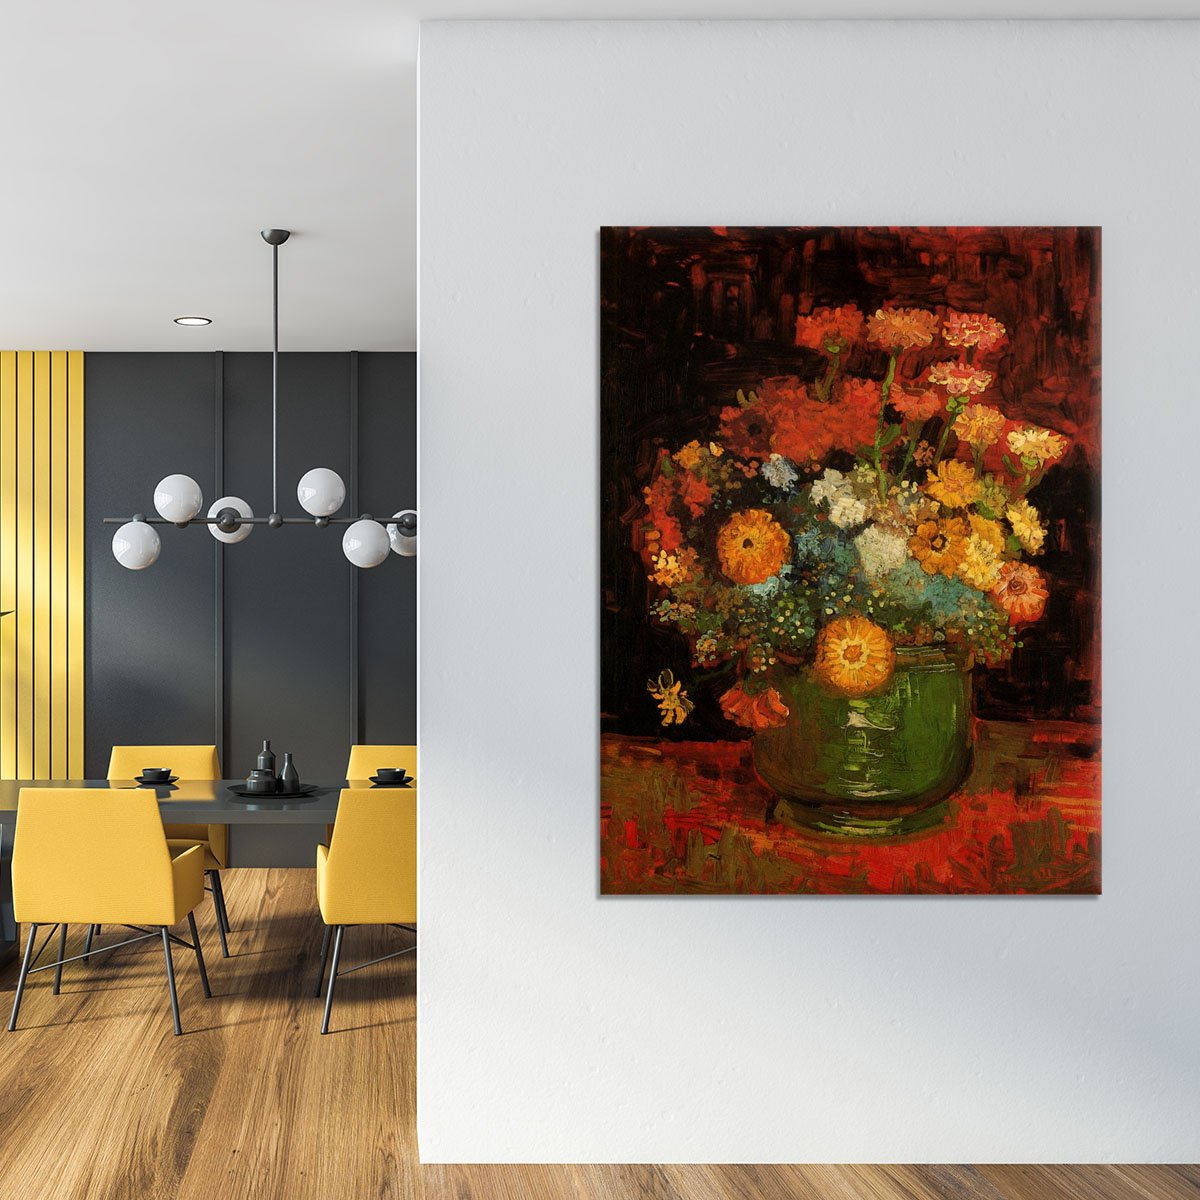 Vase with Zinnias by Van Gogh Canvas Print or Poster